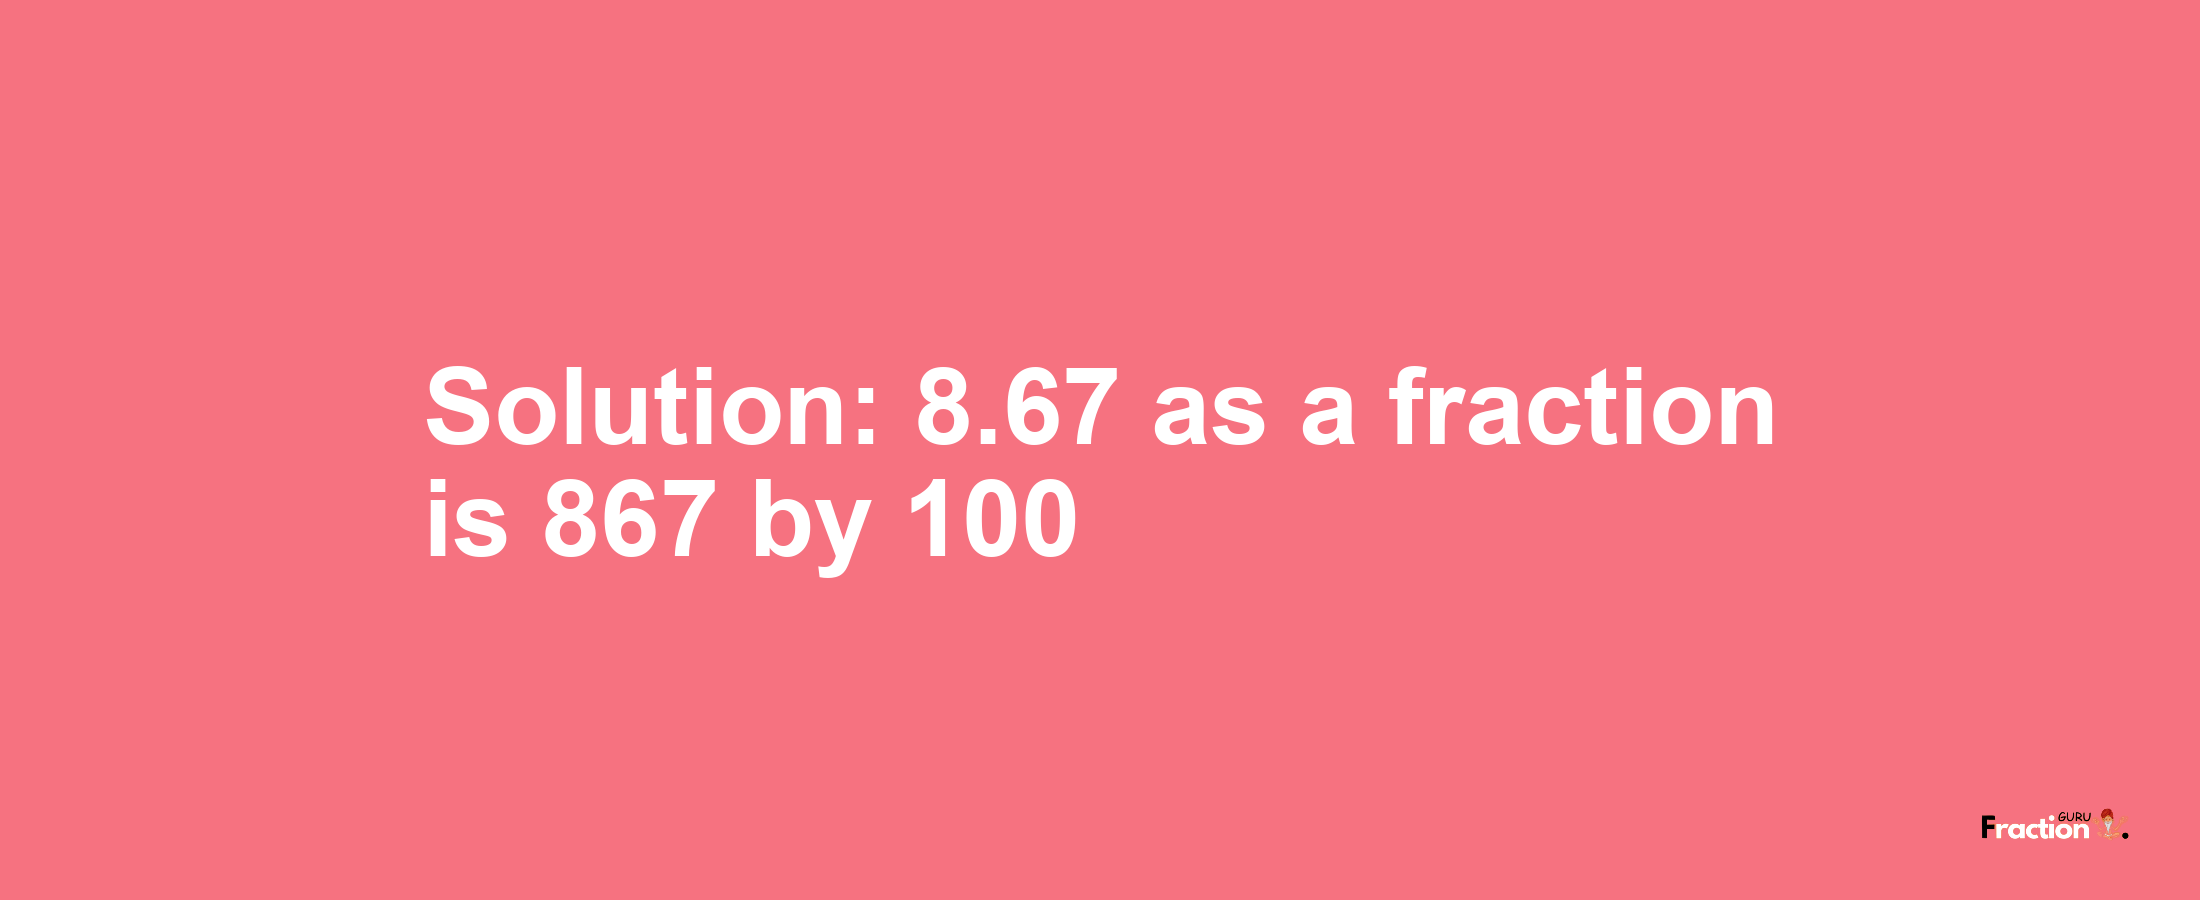 Solution:8.67 as a fraction is 867/100